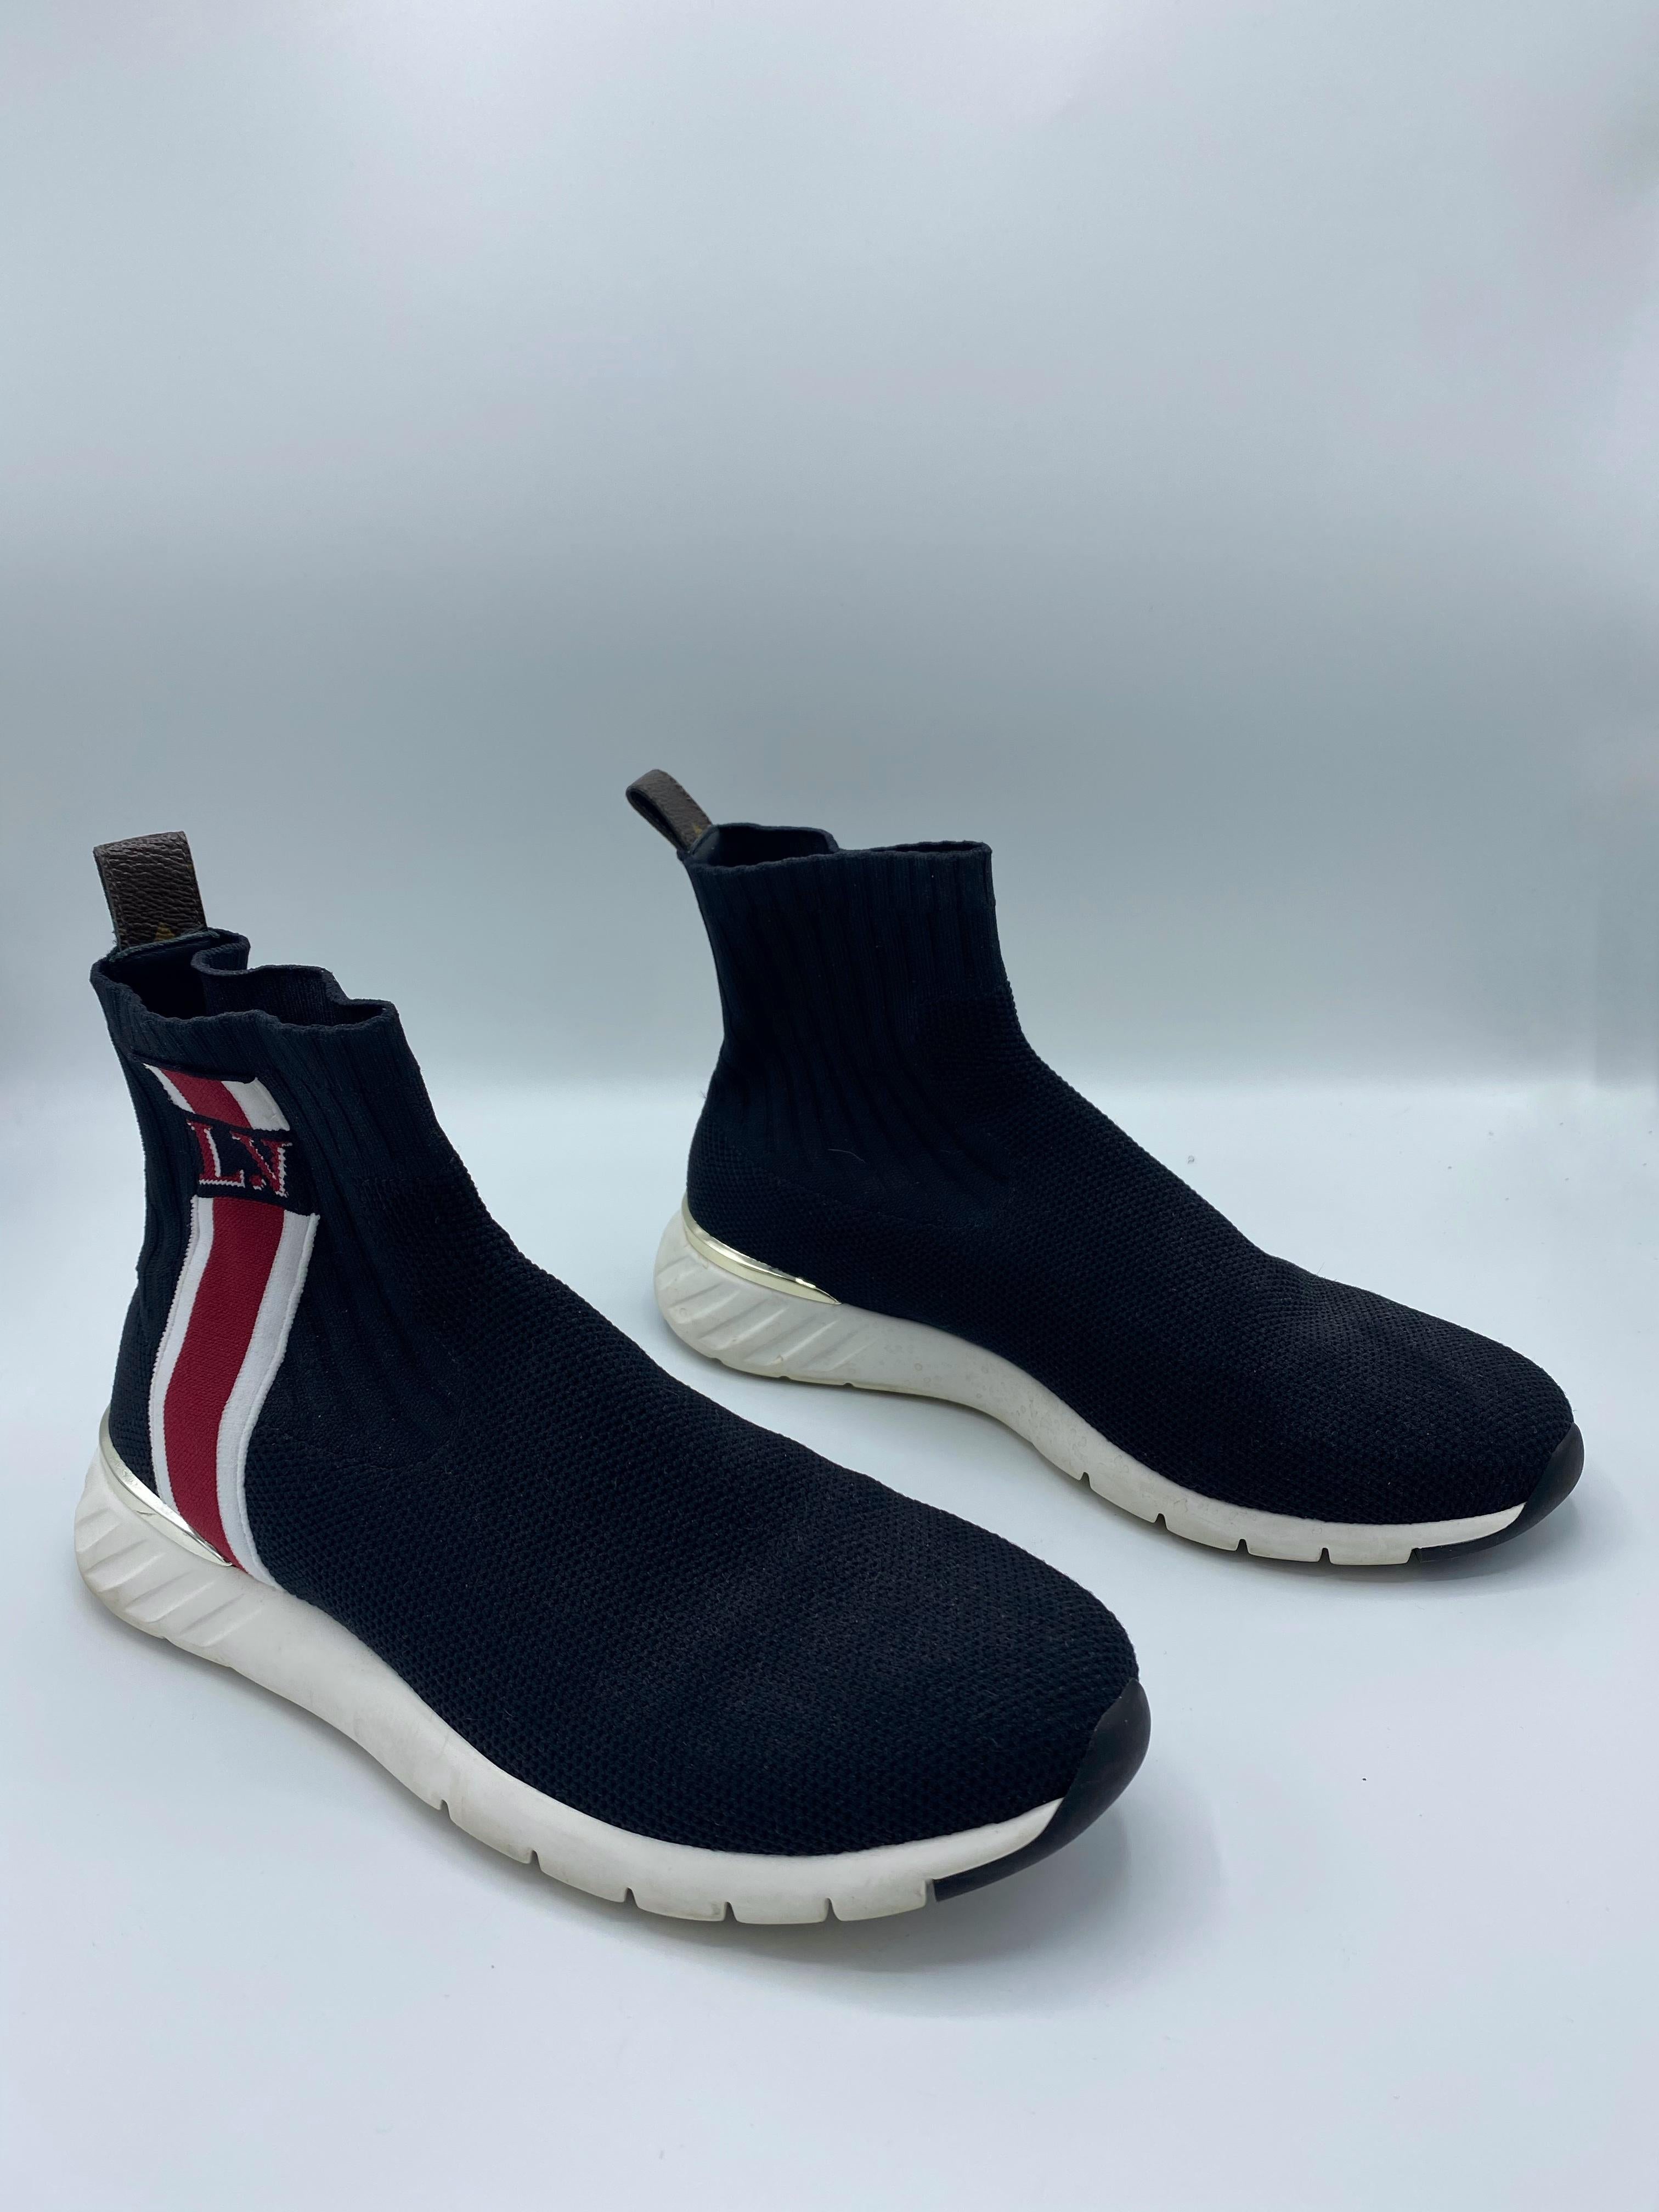 Product details: 

The sneakers made of black embroidered fabric and feature a red and white striping with the LV logo and white rubber soles. Made in Italy.